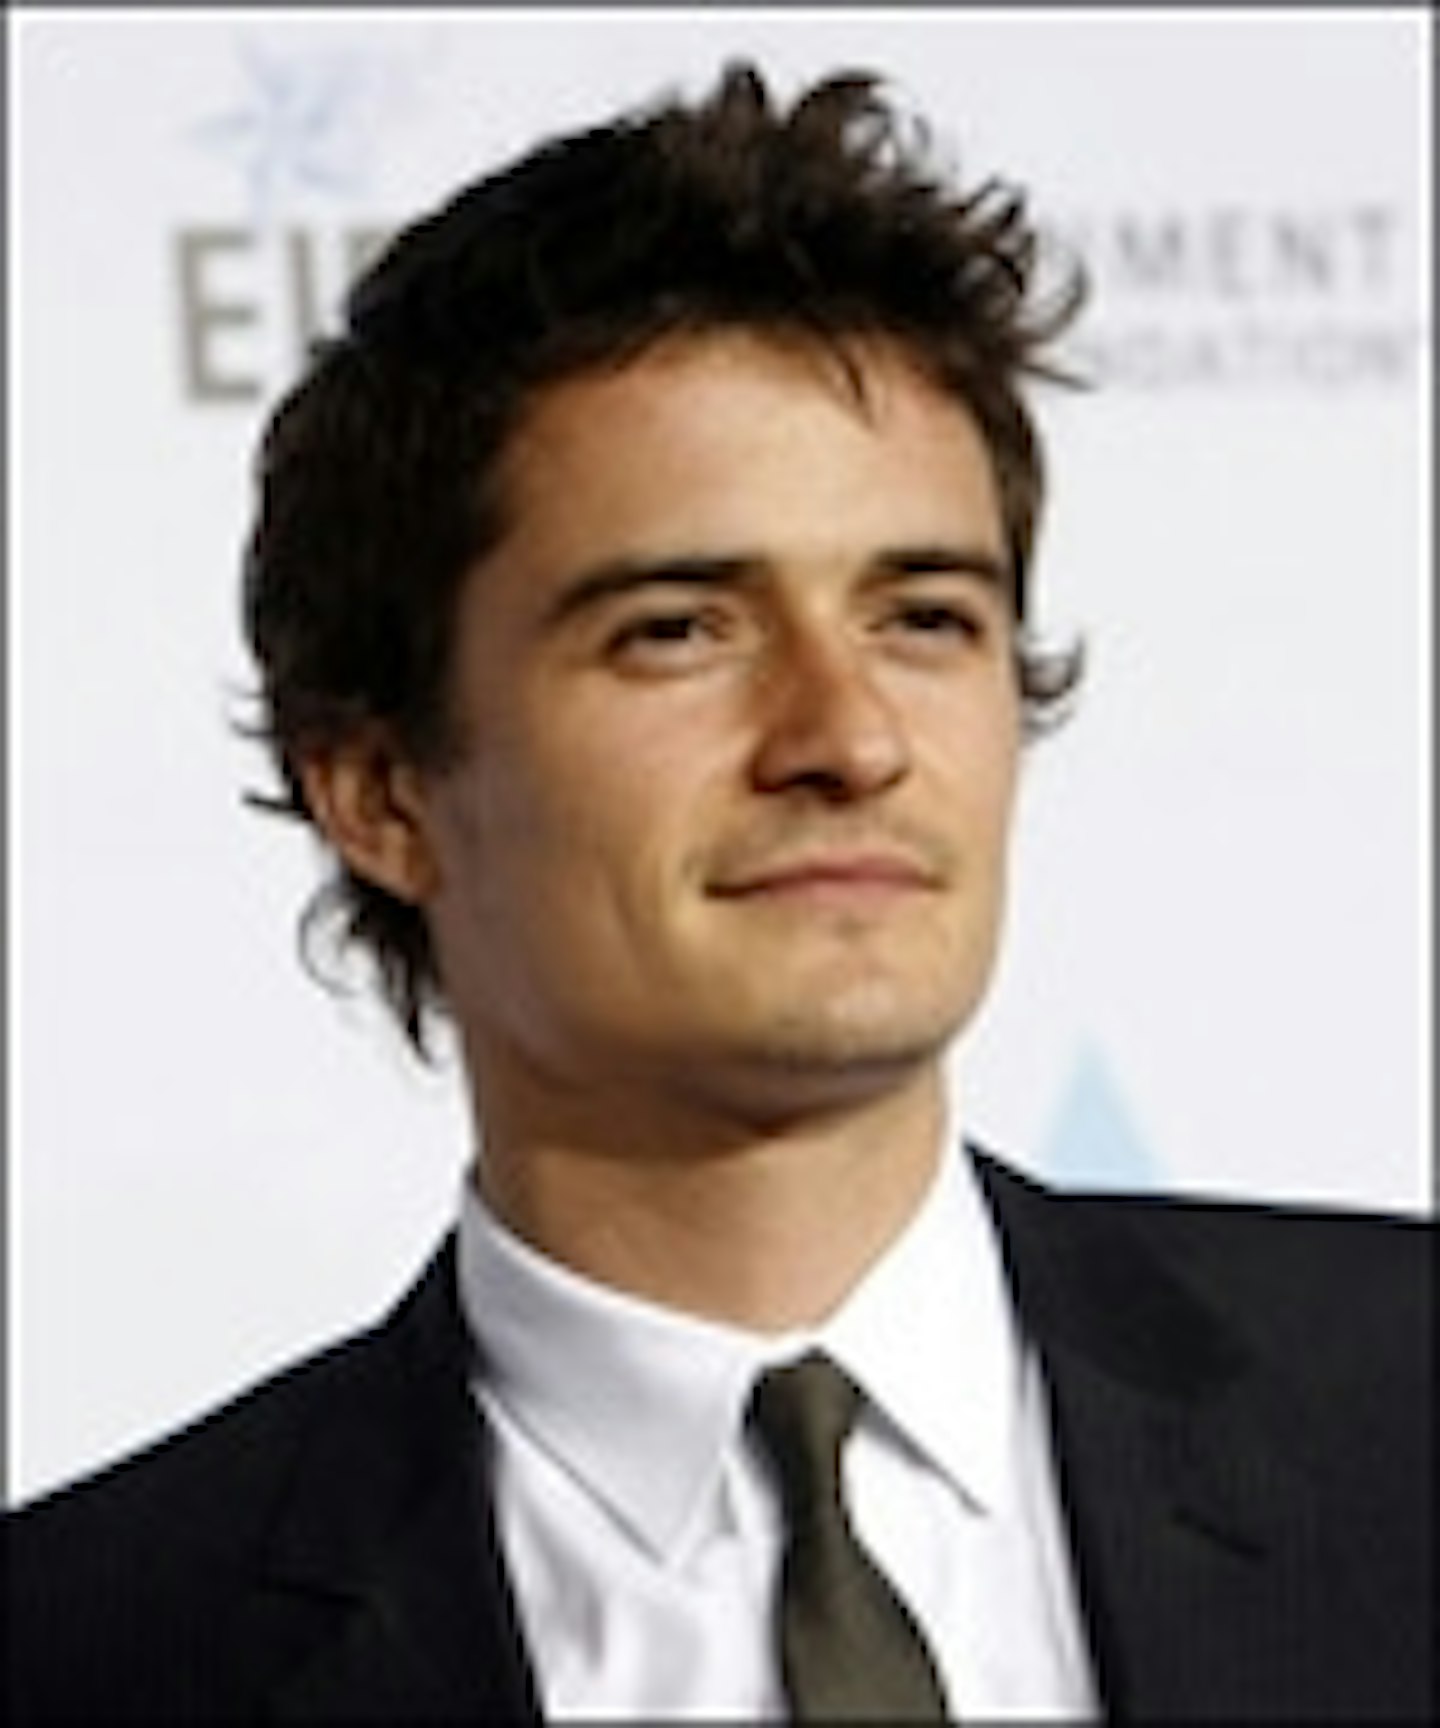 Orlando Bloom Is The Good Doctor